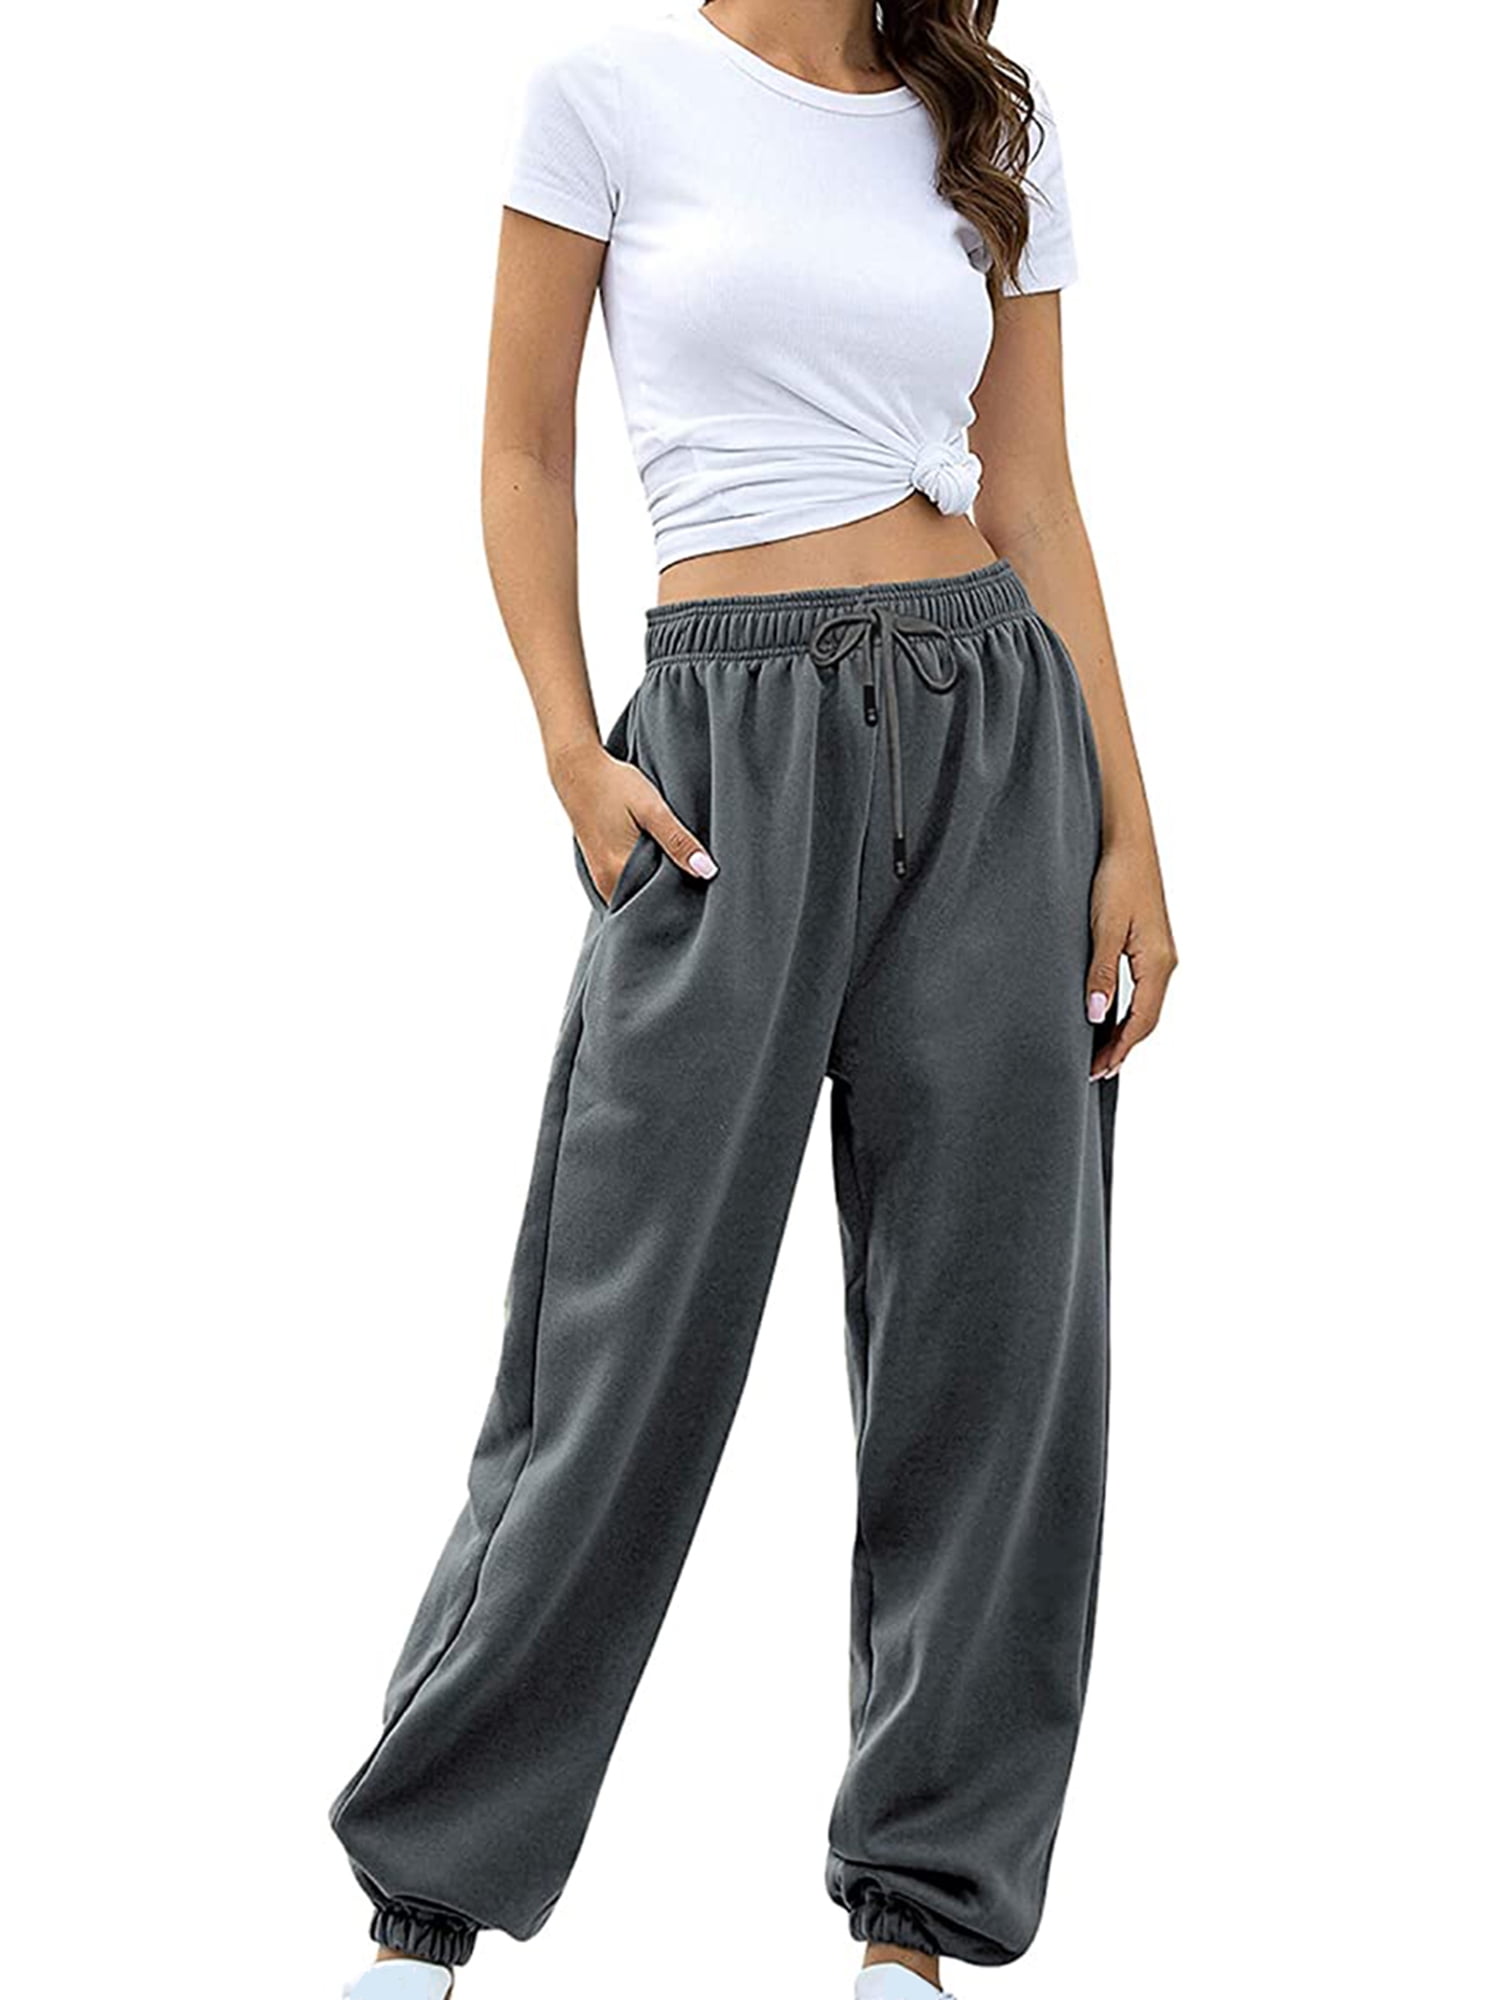 TOPGOD Women Sweatpants Drawstring Elastic-Waist Long Trousers with Pockets  for Girls Baggy Pants 